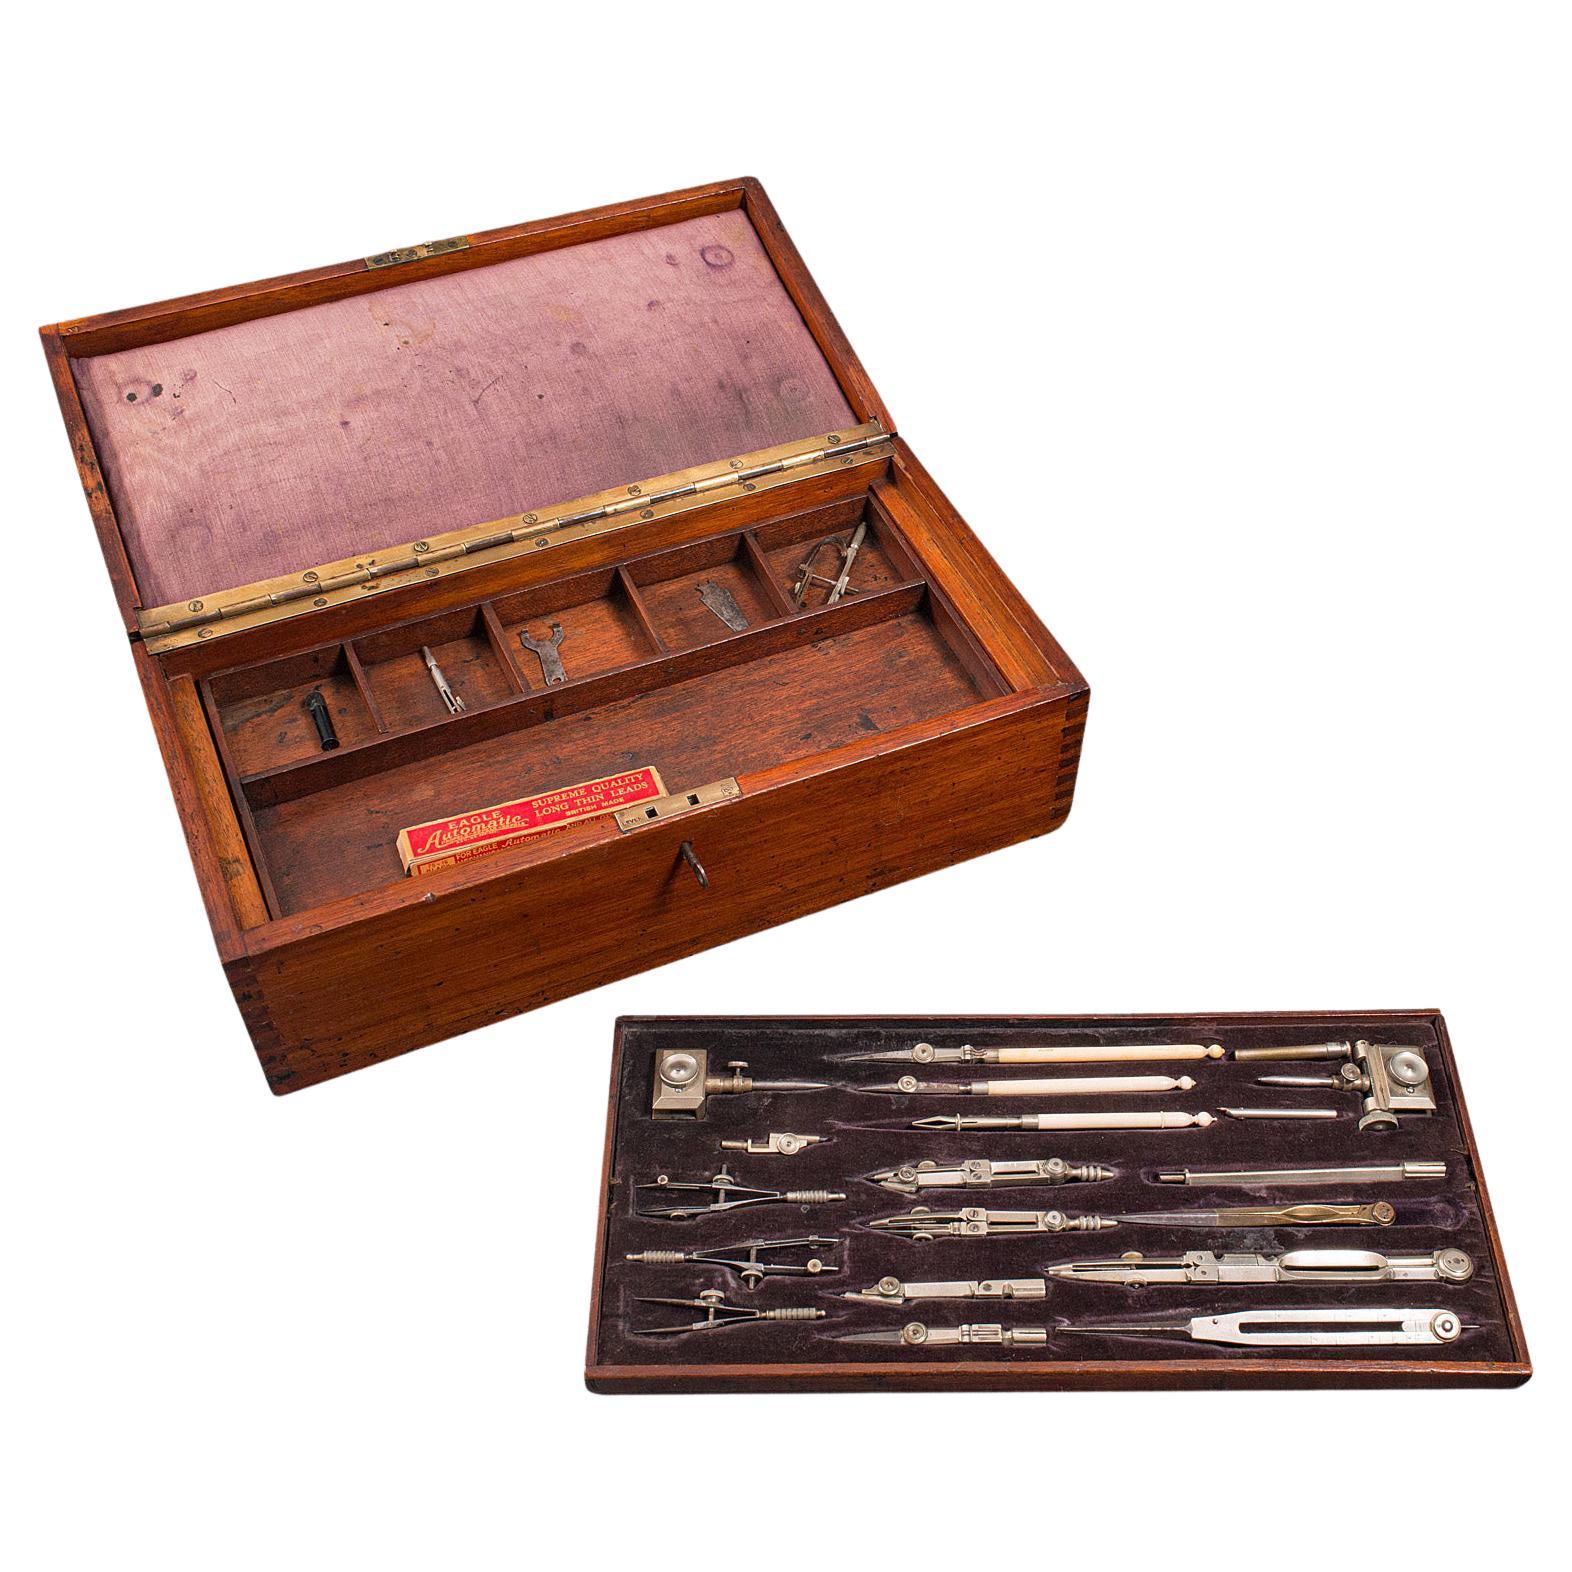 Antique Cased Draughtsman's Set, English, Architect's Drawing Tools, Edwardian